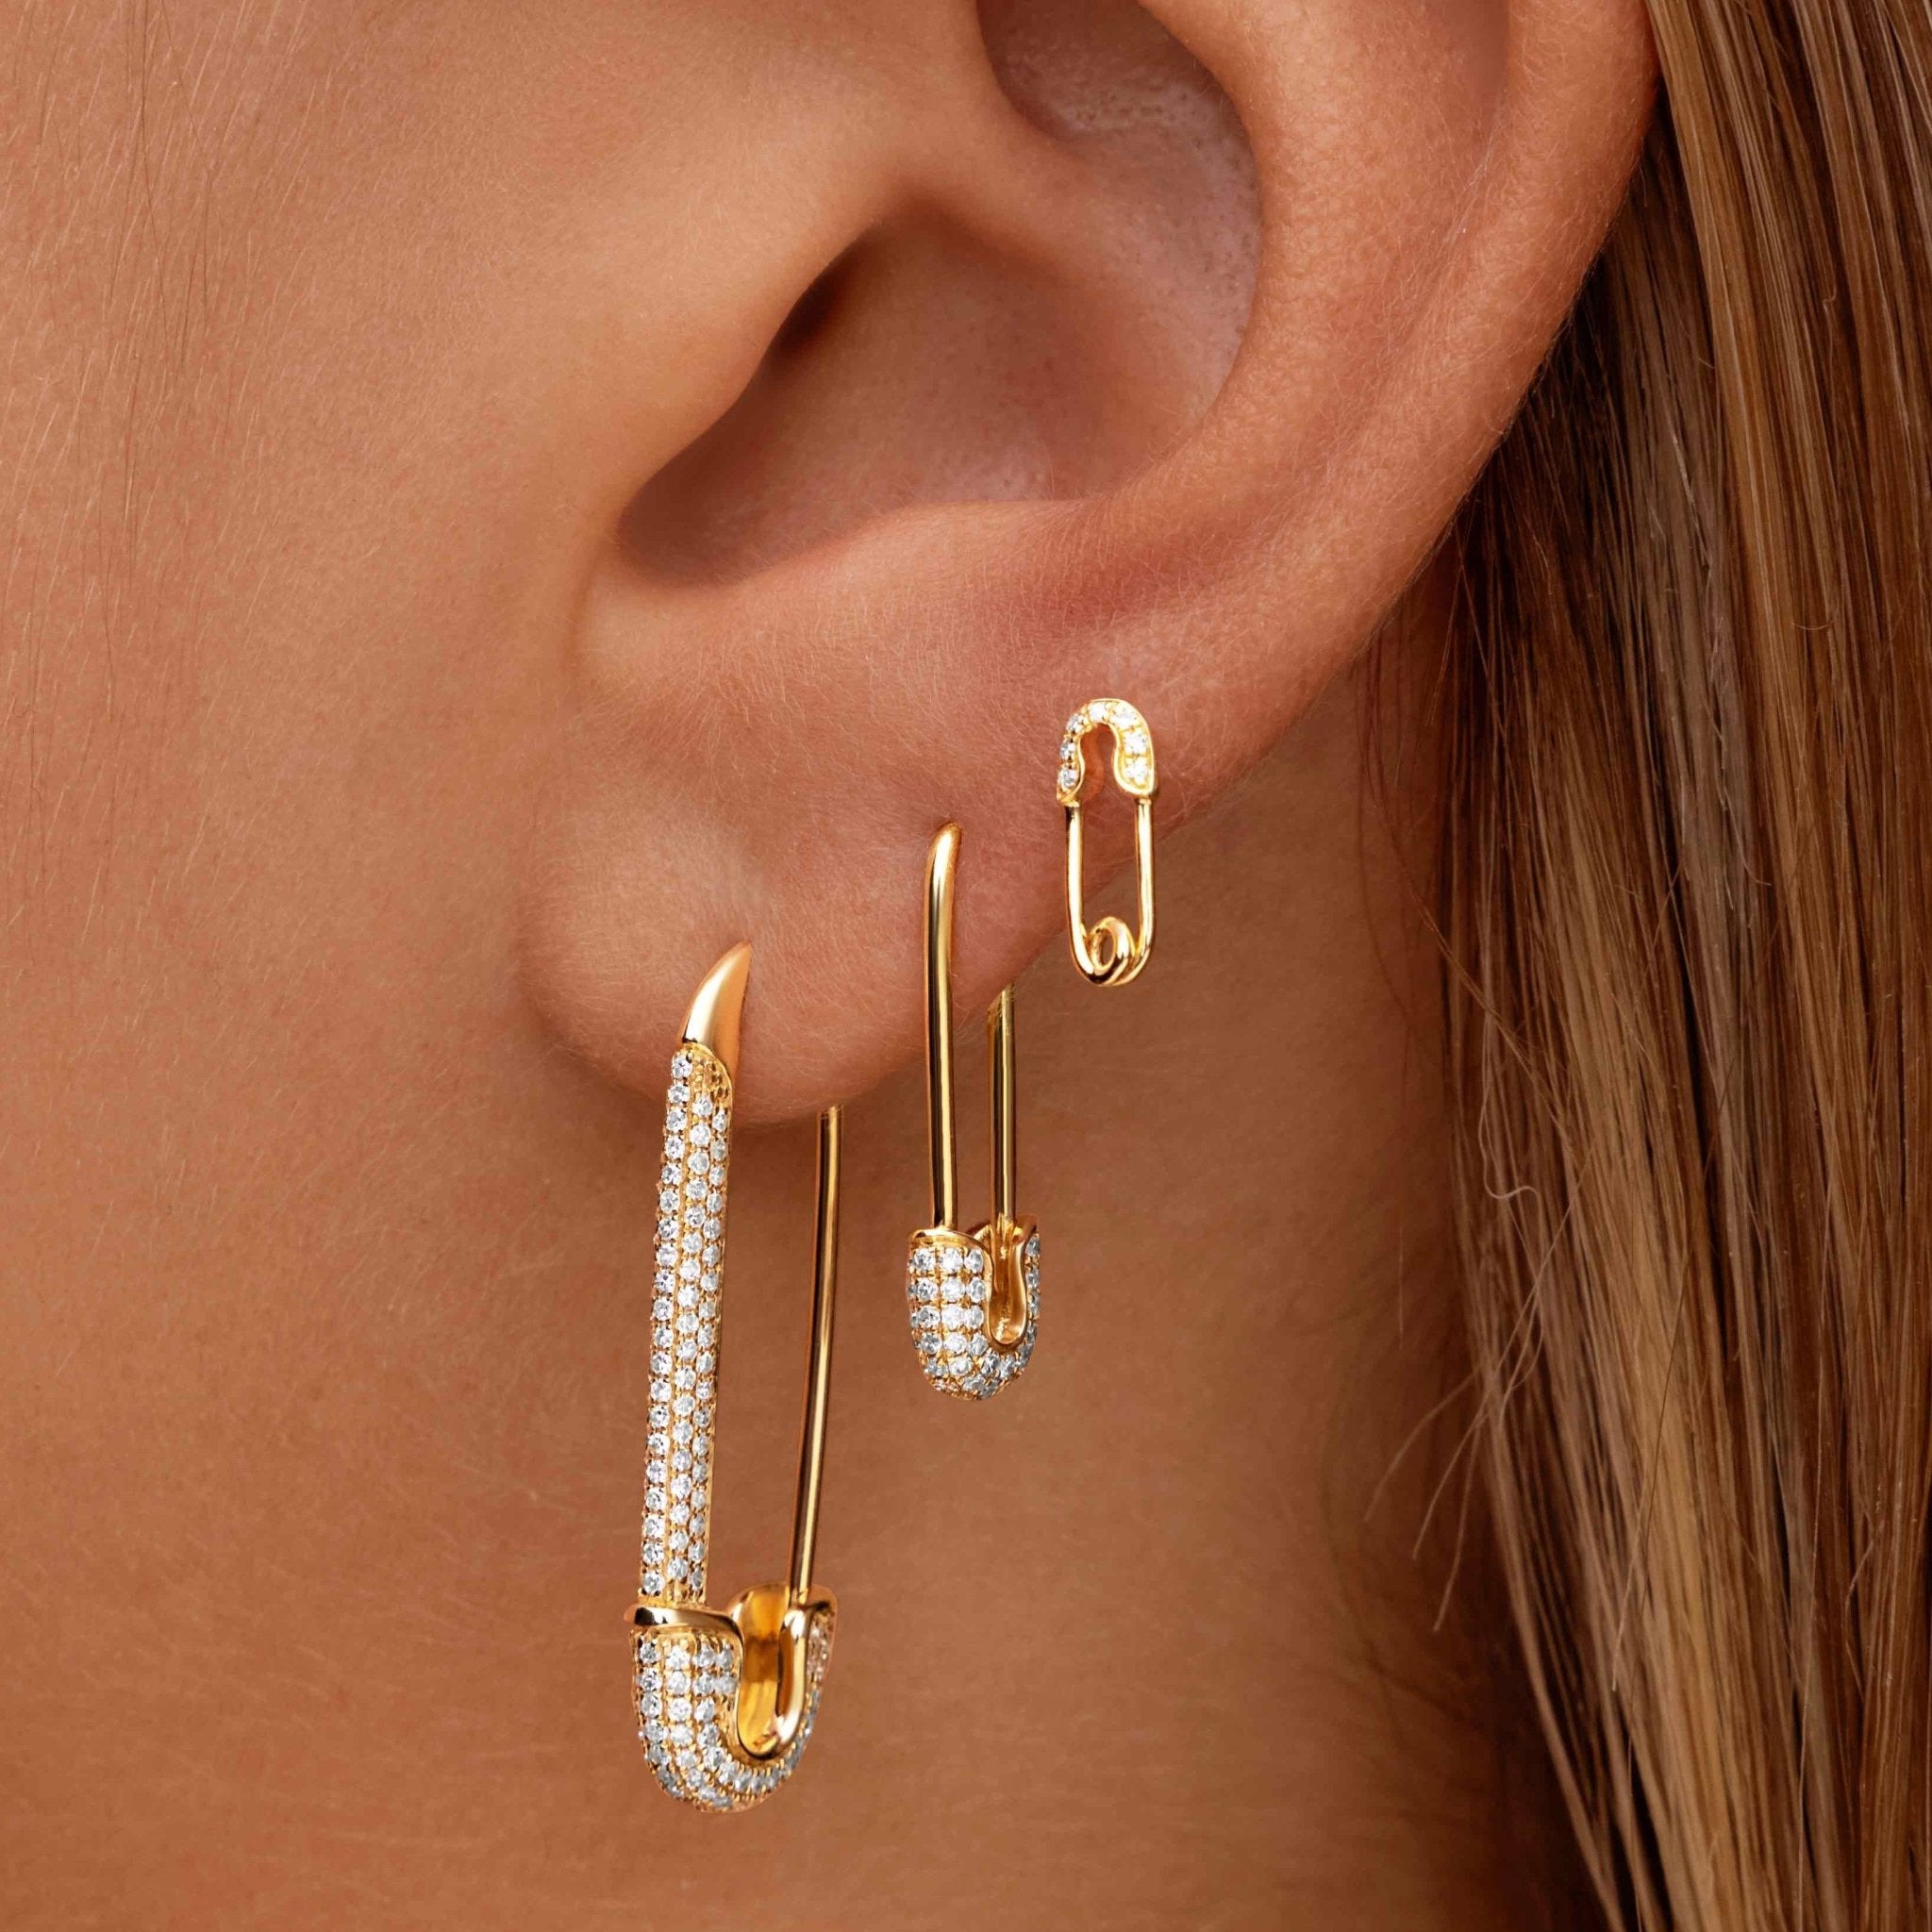 Small Diamond Safety Pin Stud Earrings - Sparkle Society